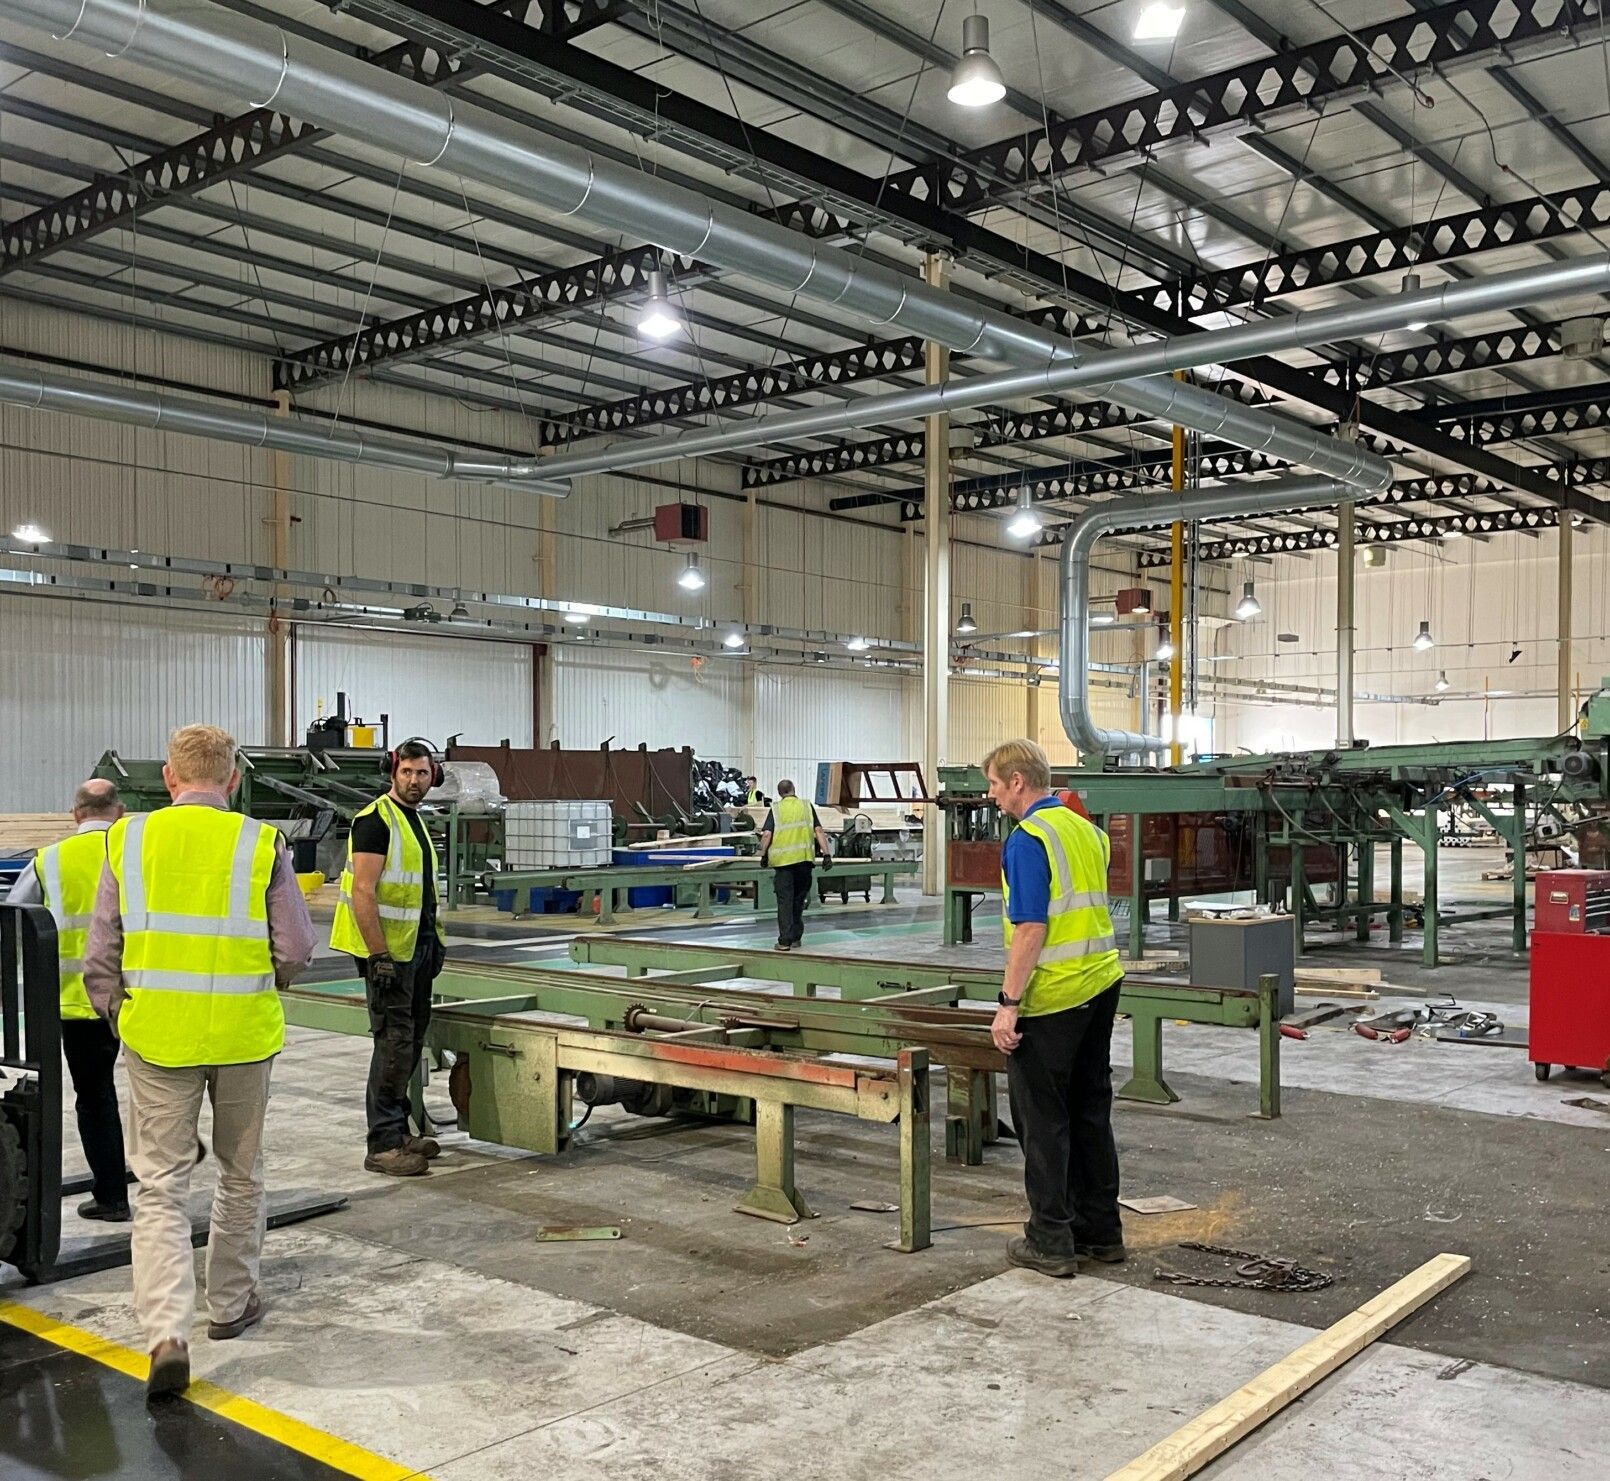 a group of men in yellow vests are working in a factory